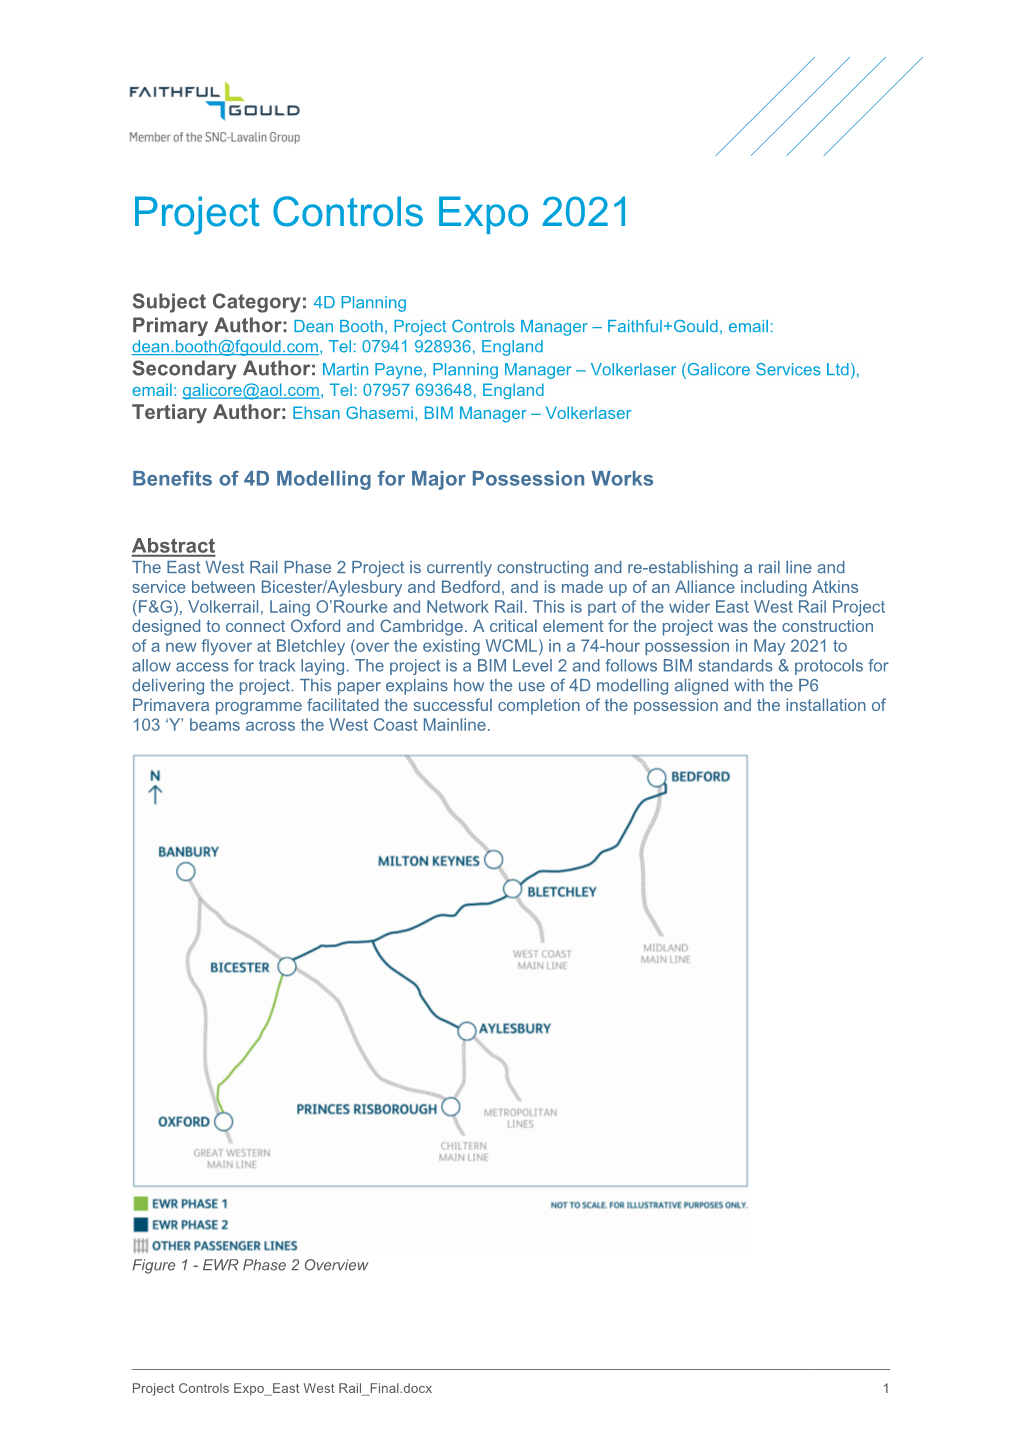 Project Controls Expo 2021